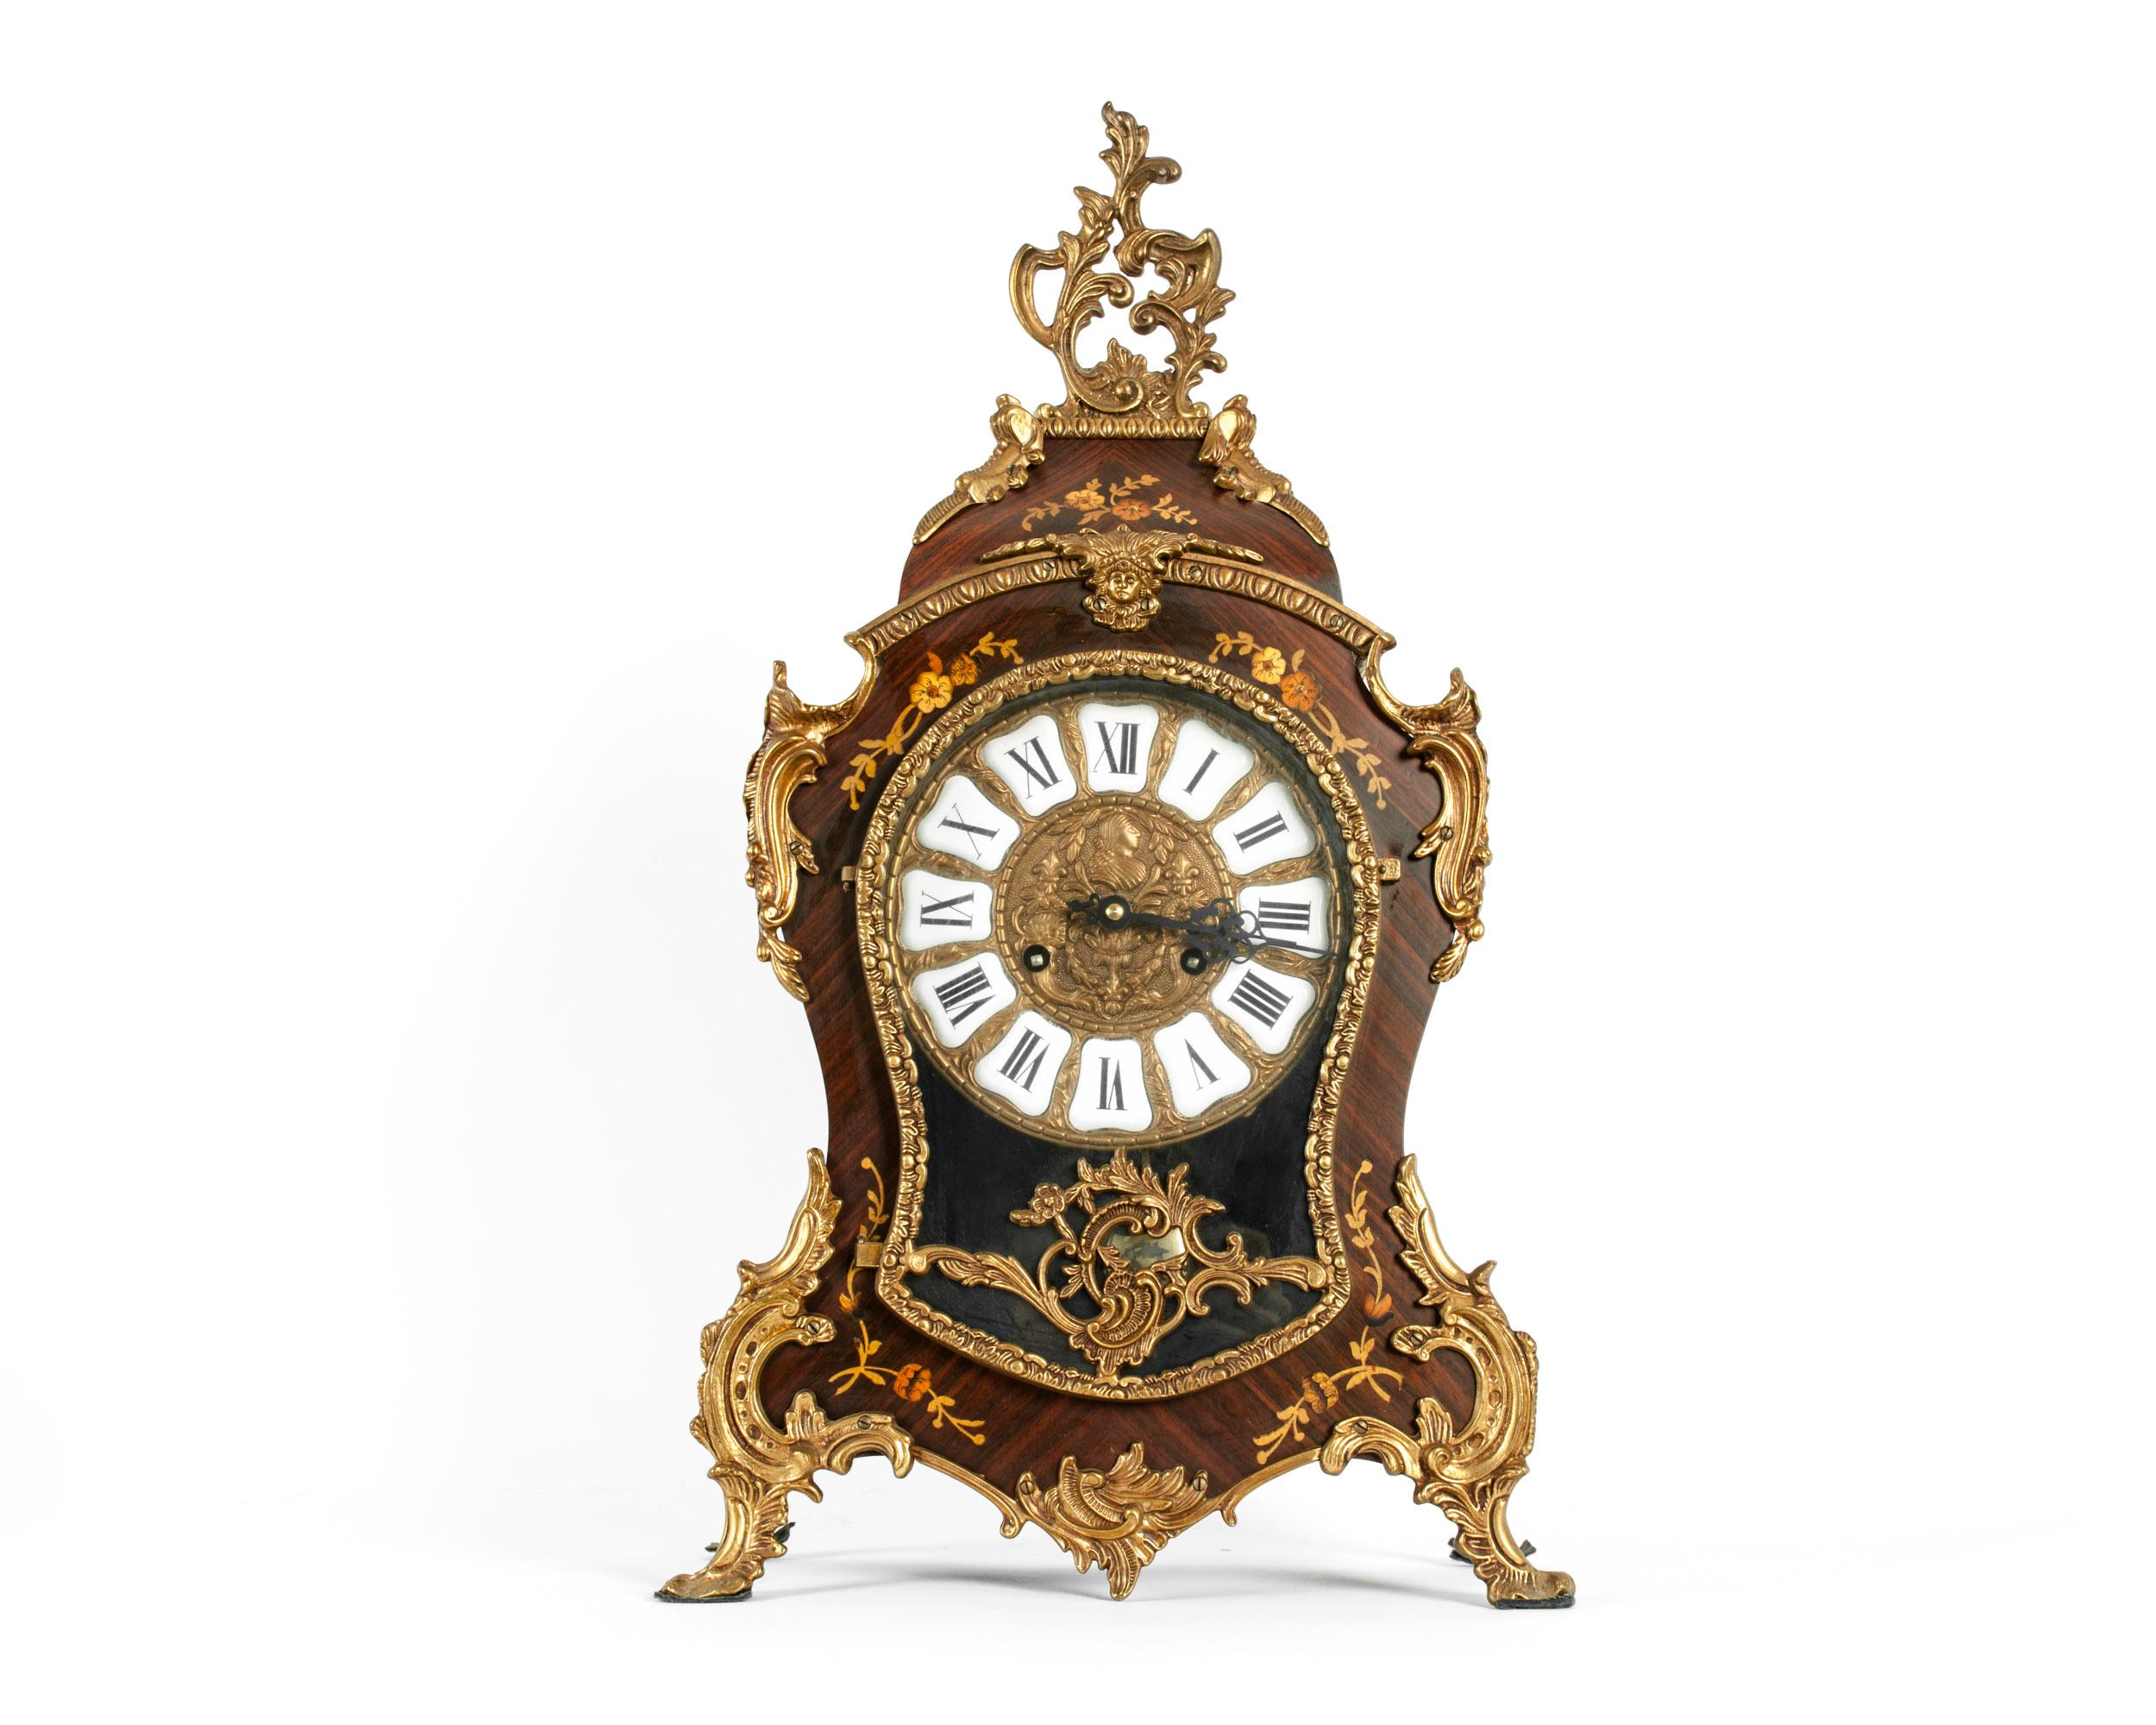 Early 19th century Louis XV style bronze mounted / porcelain face with wall mount stand German movement clock. The wall / desk clock is in great antique condition with wear appropriate with age / use. The clock measure about 23 inches high x 12